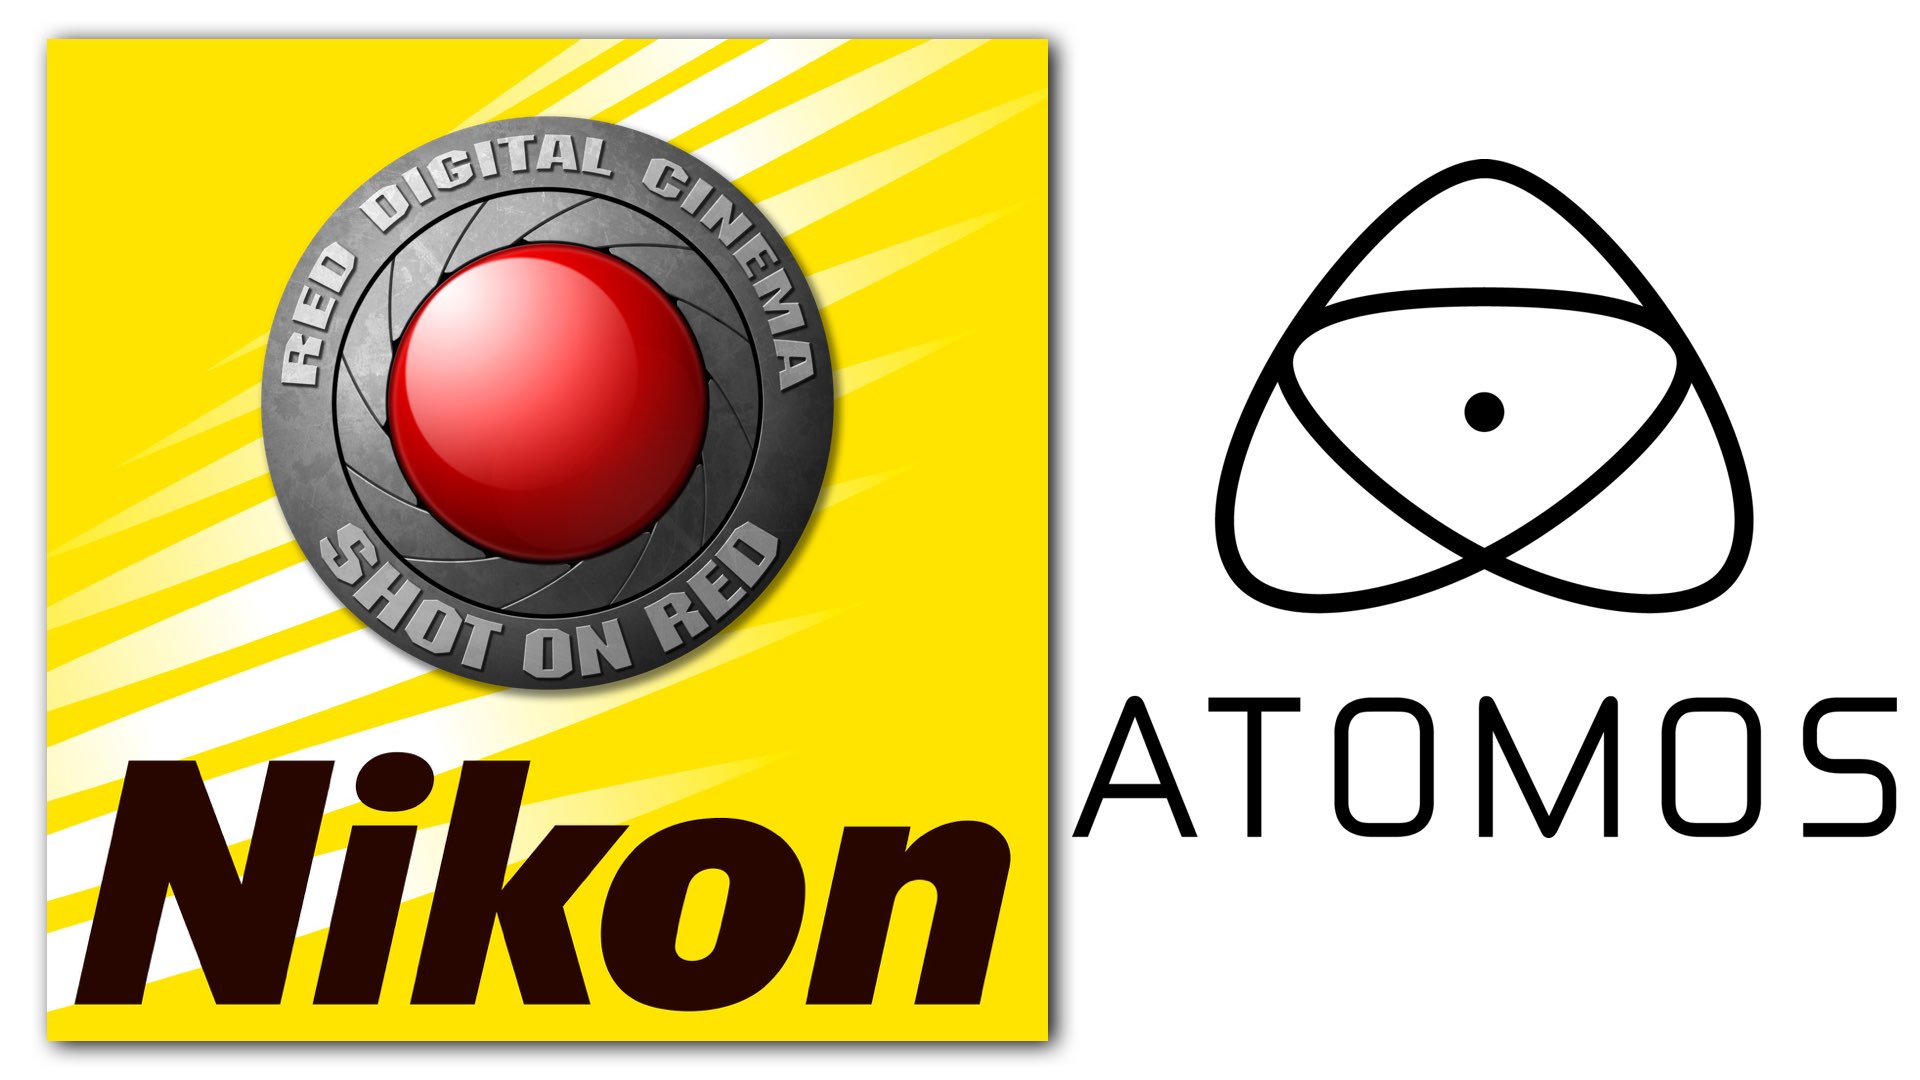 Atomos Welcomes Nikon Acquisition of RED: “Explosion of Innovation”